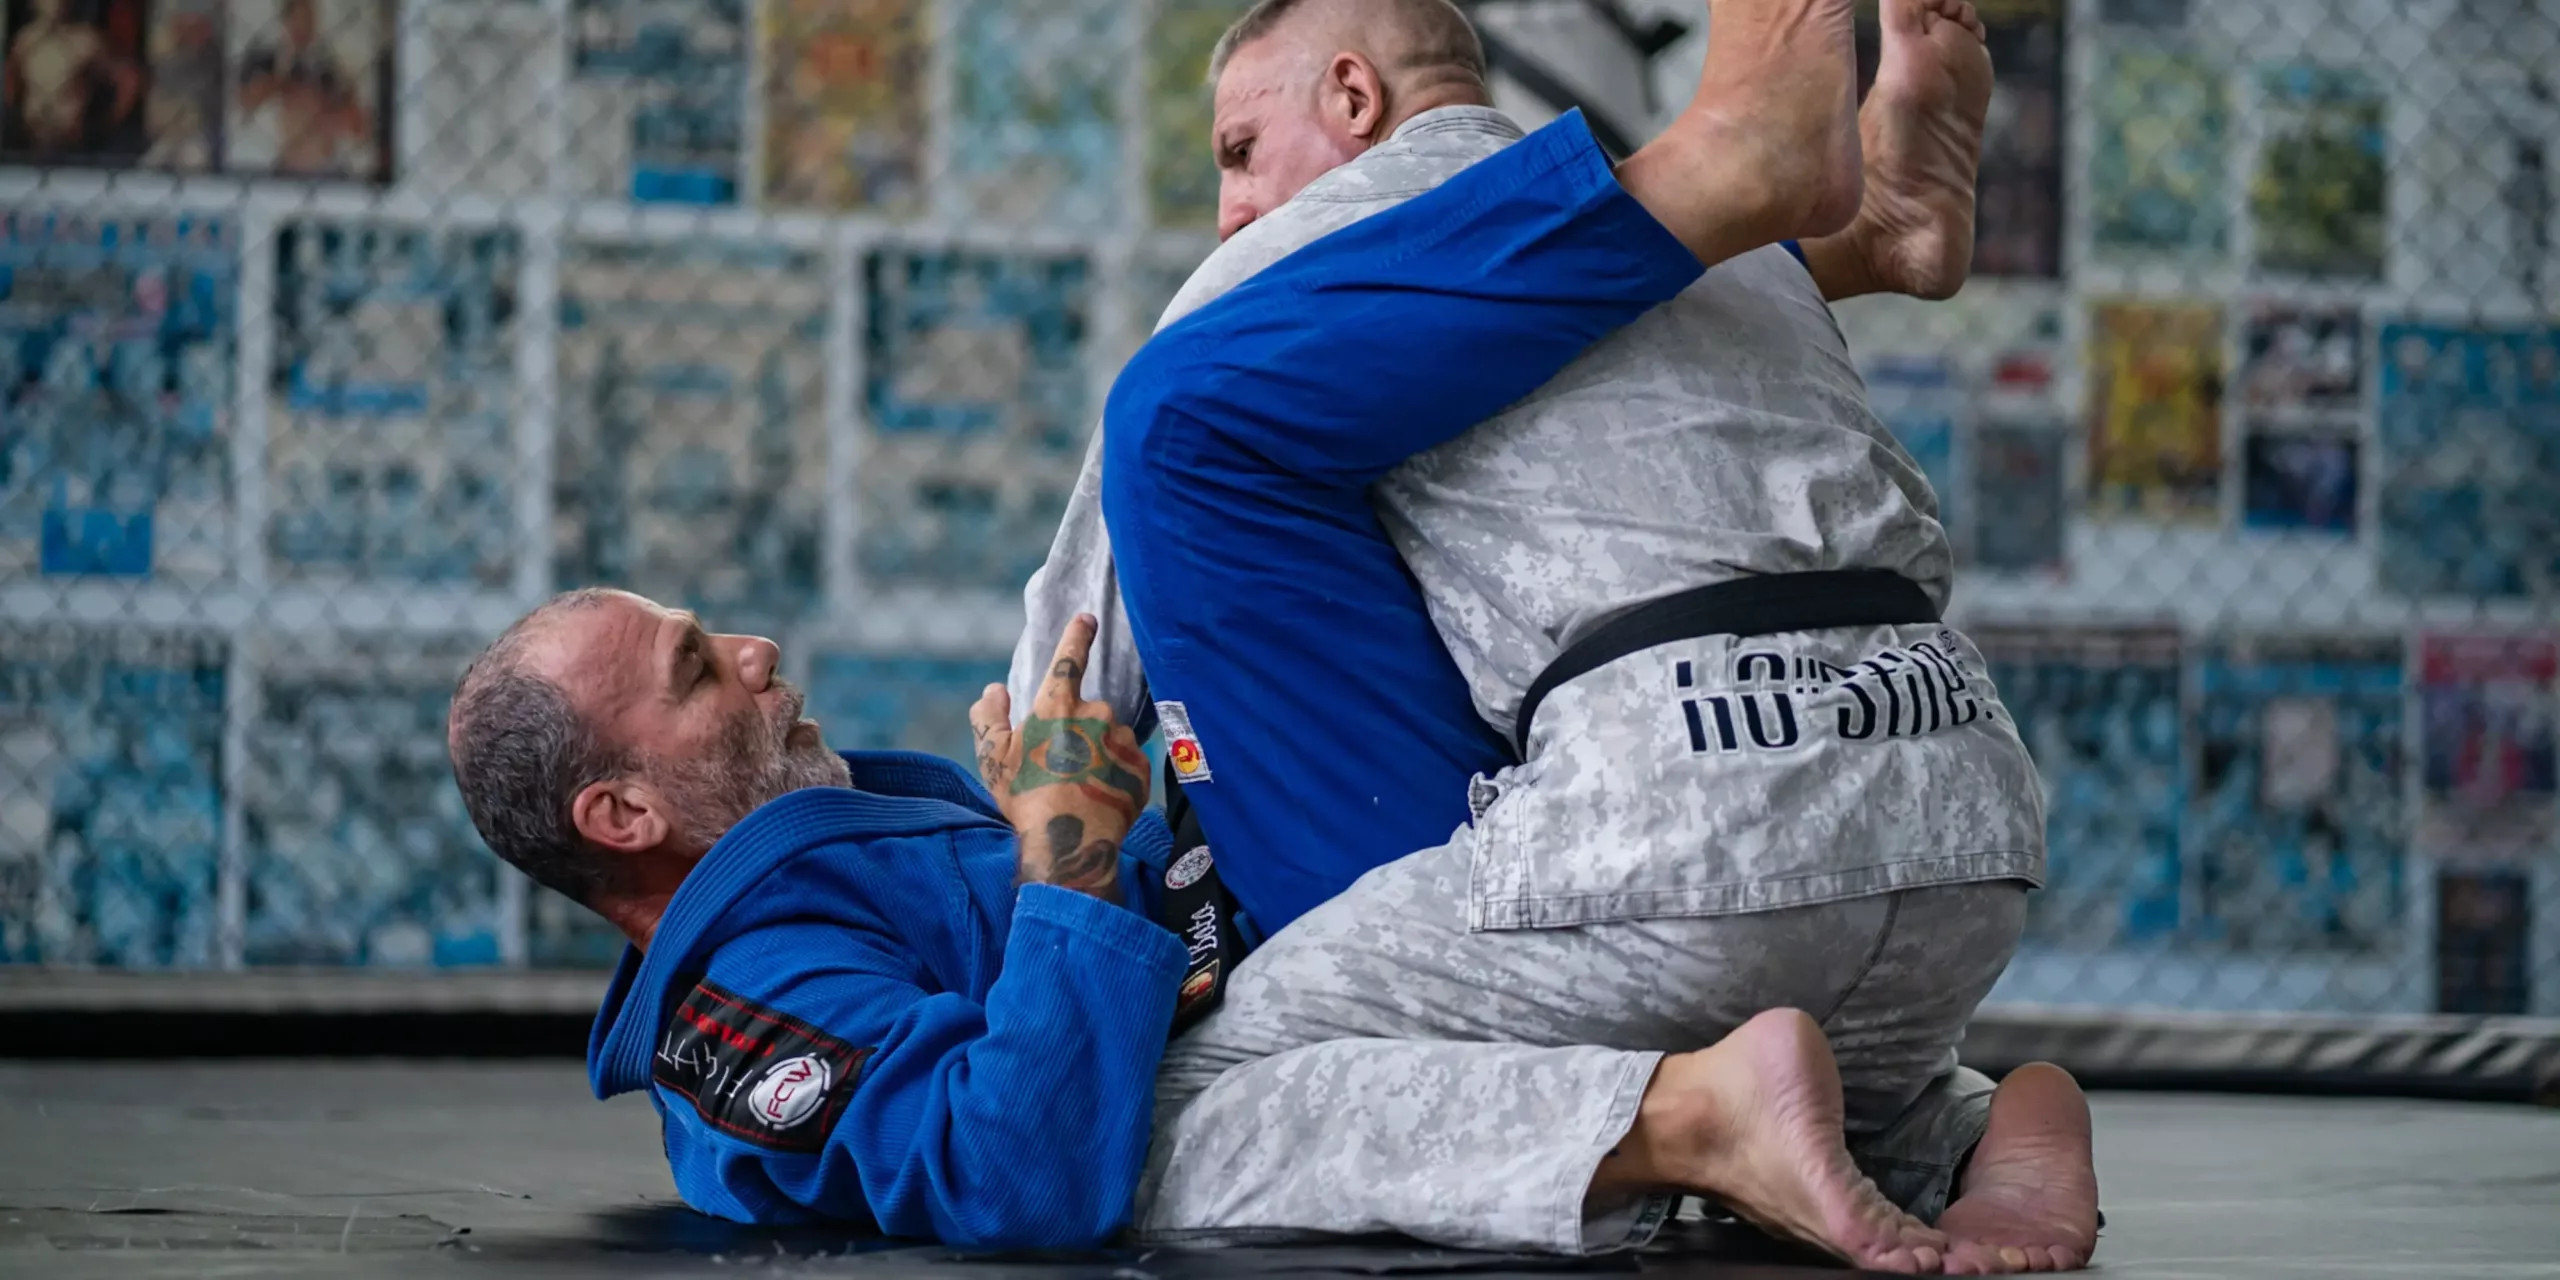 Two Brazilian Jiu-Jitsu practitioners engaged in technical training, with one on his back in guard position while the other works to pass, amidst the backdrop of a dojo with BJJ lineage displays.